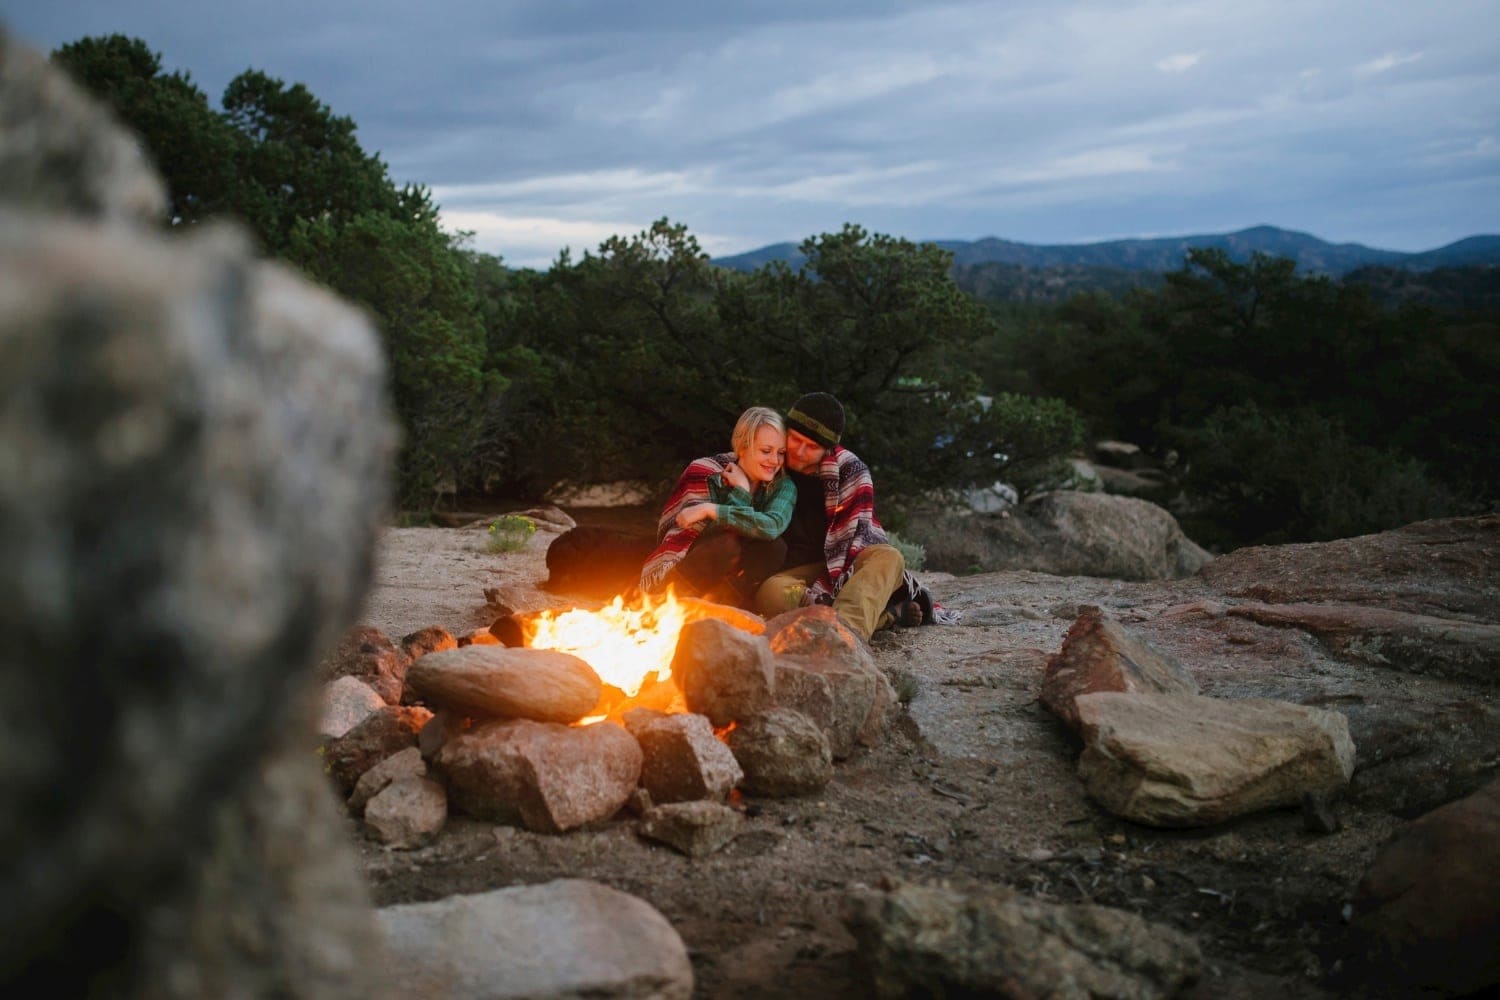 Couple celebrating their 10 year anniversary in Buena Vista, Colorado. They are sitting on a mountain, with a campfire in the foreground.